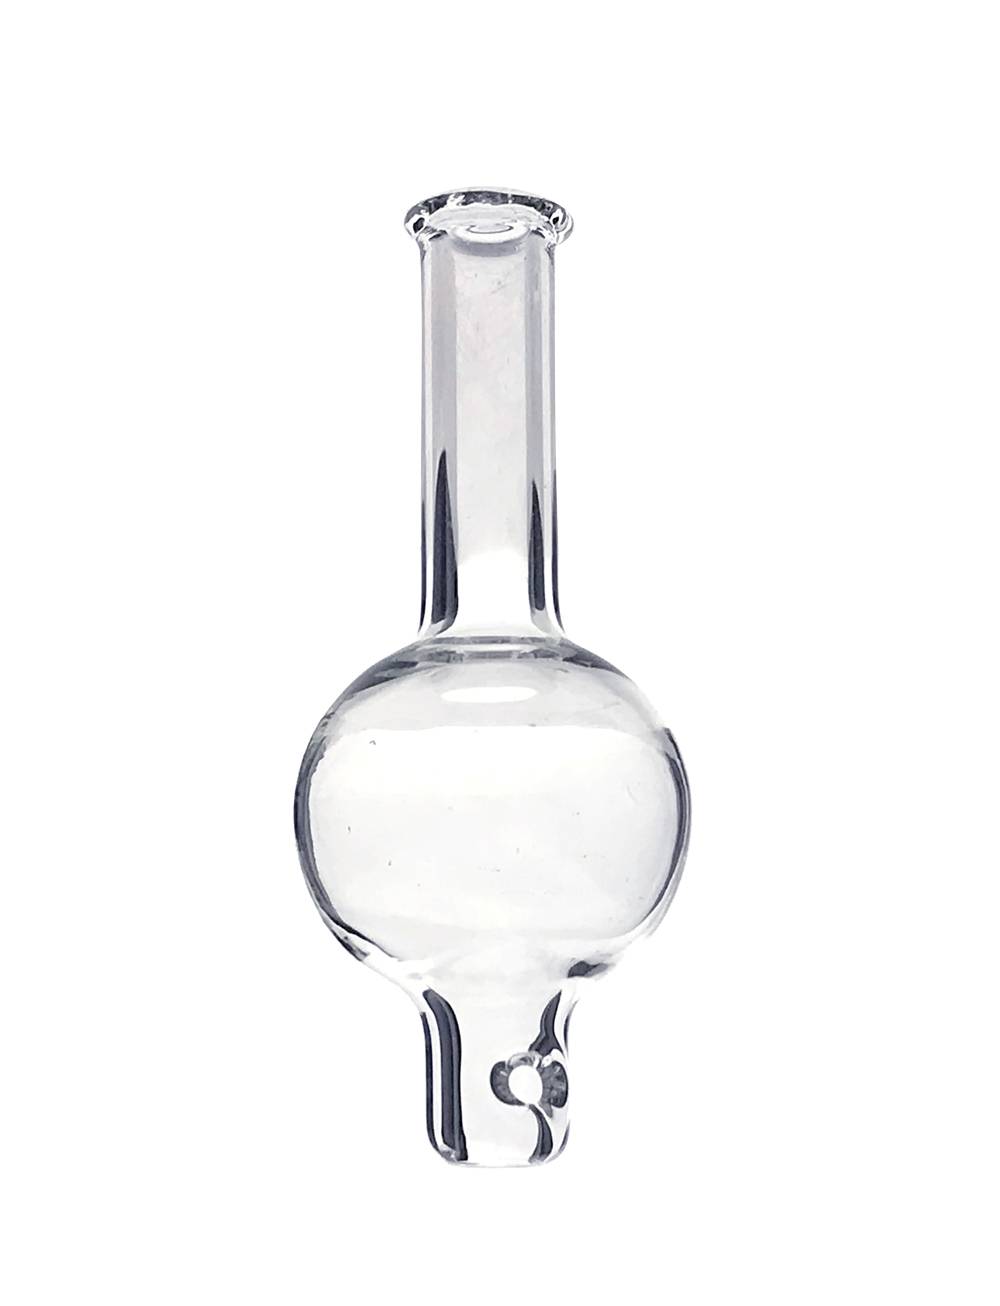 GLASS CARB CAP FOR SPINNER BEADS